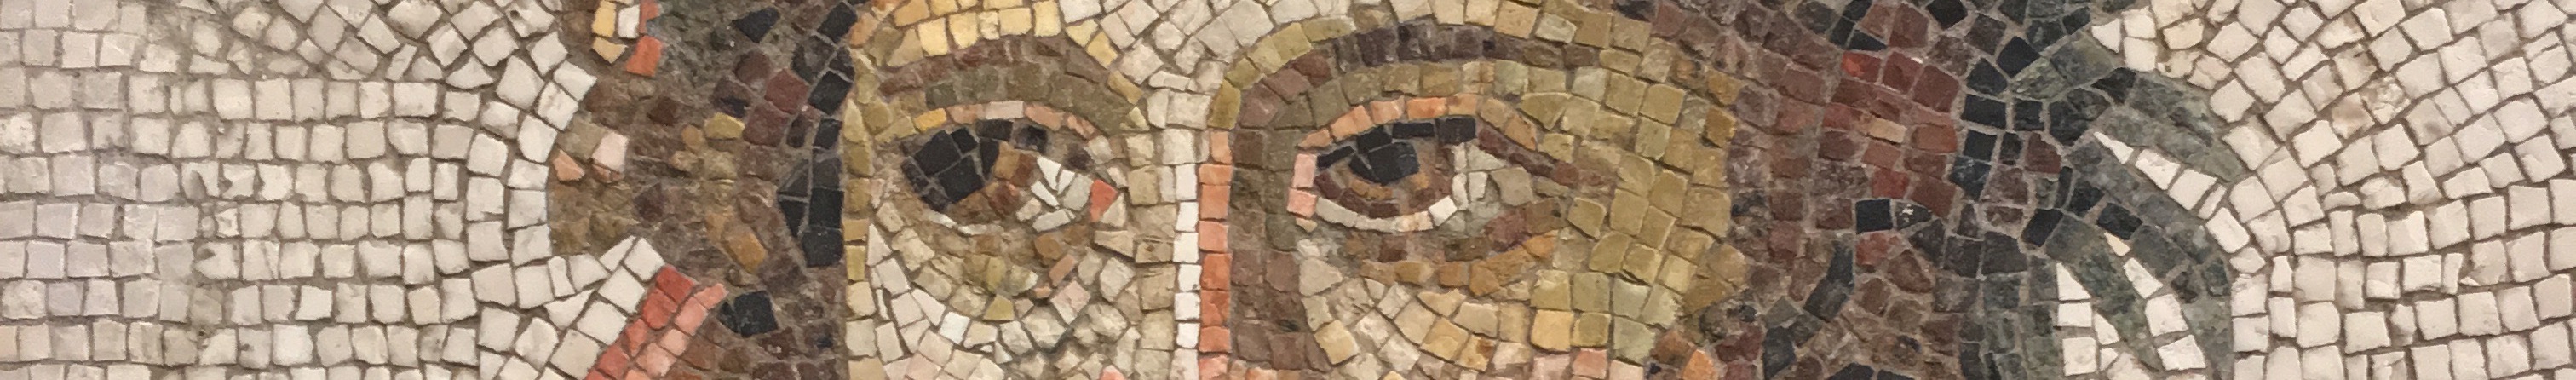 Detail of an ancient Greek mosaic portrait of a person's face, cropped to show only their eyes.